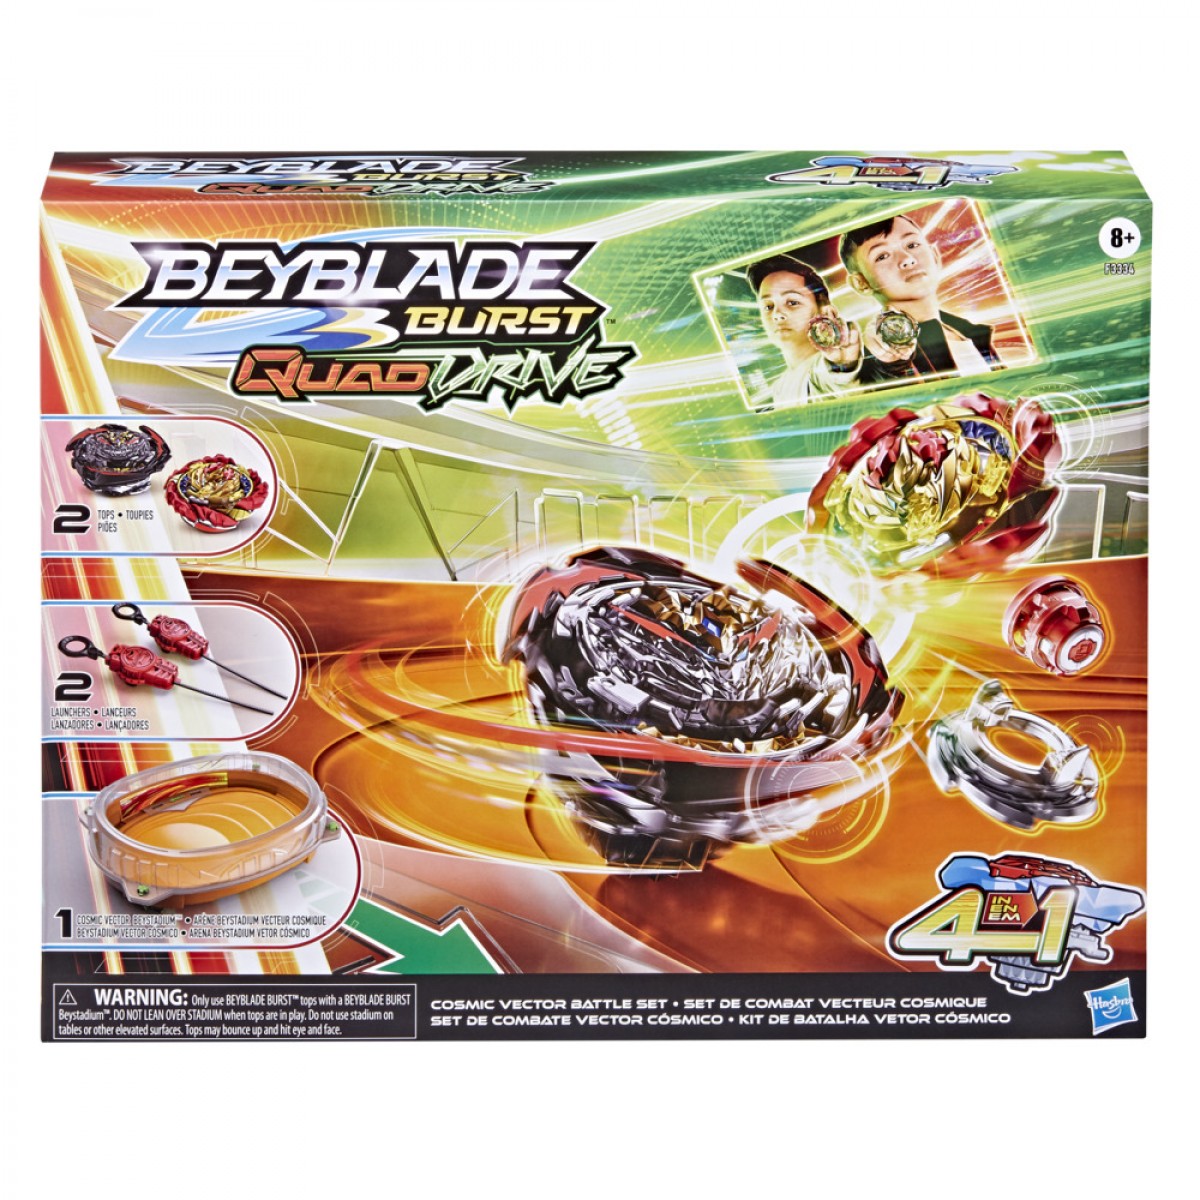 Beyblade Burst Quaddrive Cosmic Vector Battle Set -- Battle Game Set With Beystadium, 2 Battling Top Toys And 2 Launchers For Ages 8 And Up